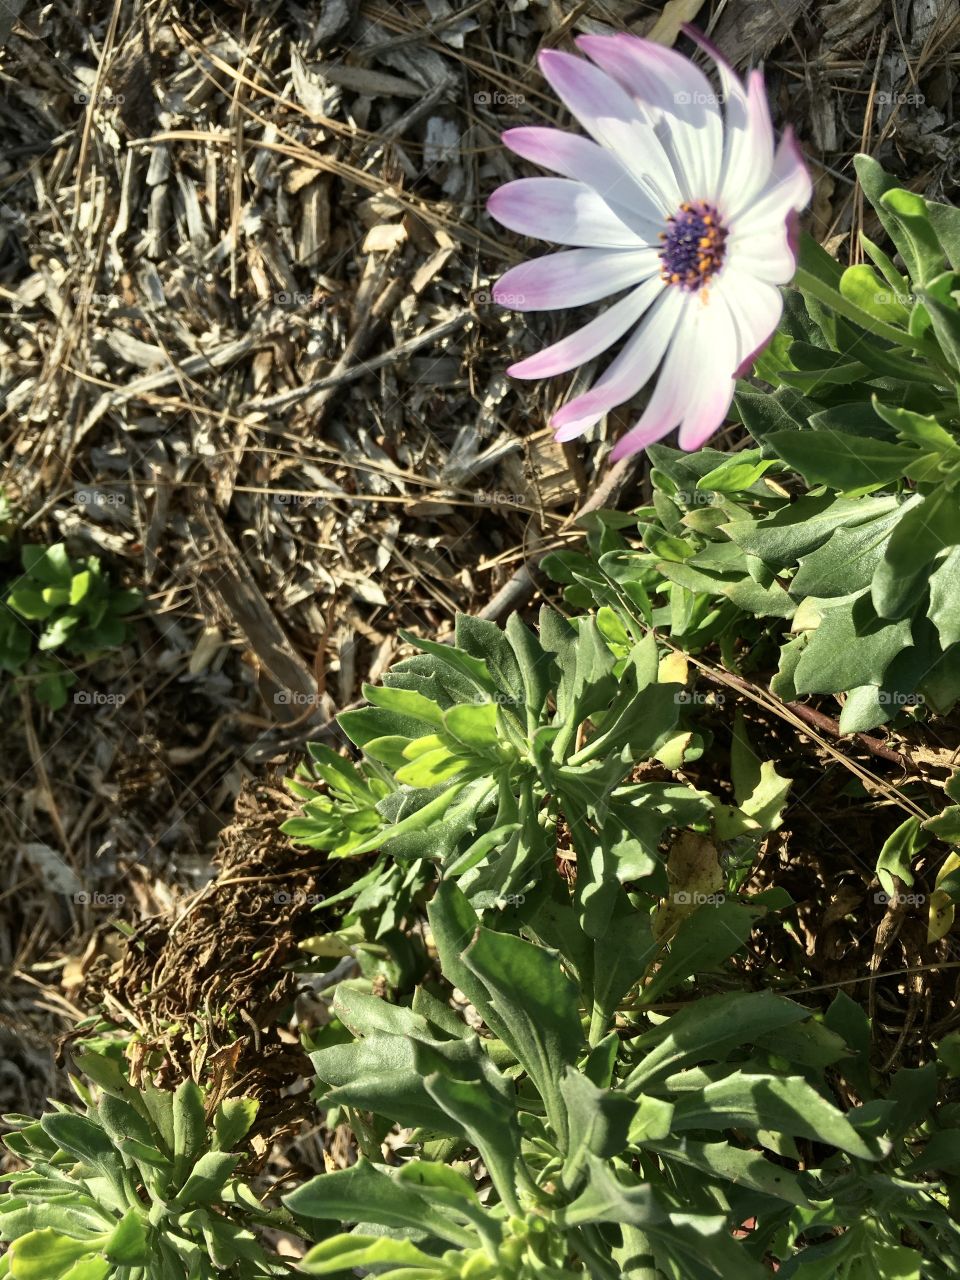 Flower, flora, daisy, white, pink, bloom, garden, growth, nature, no person, closeup, blooming, outside, outdoors